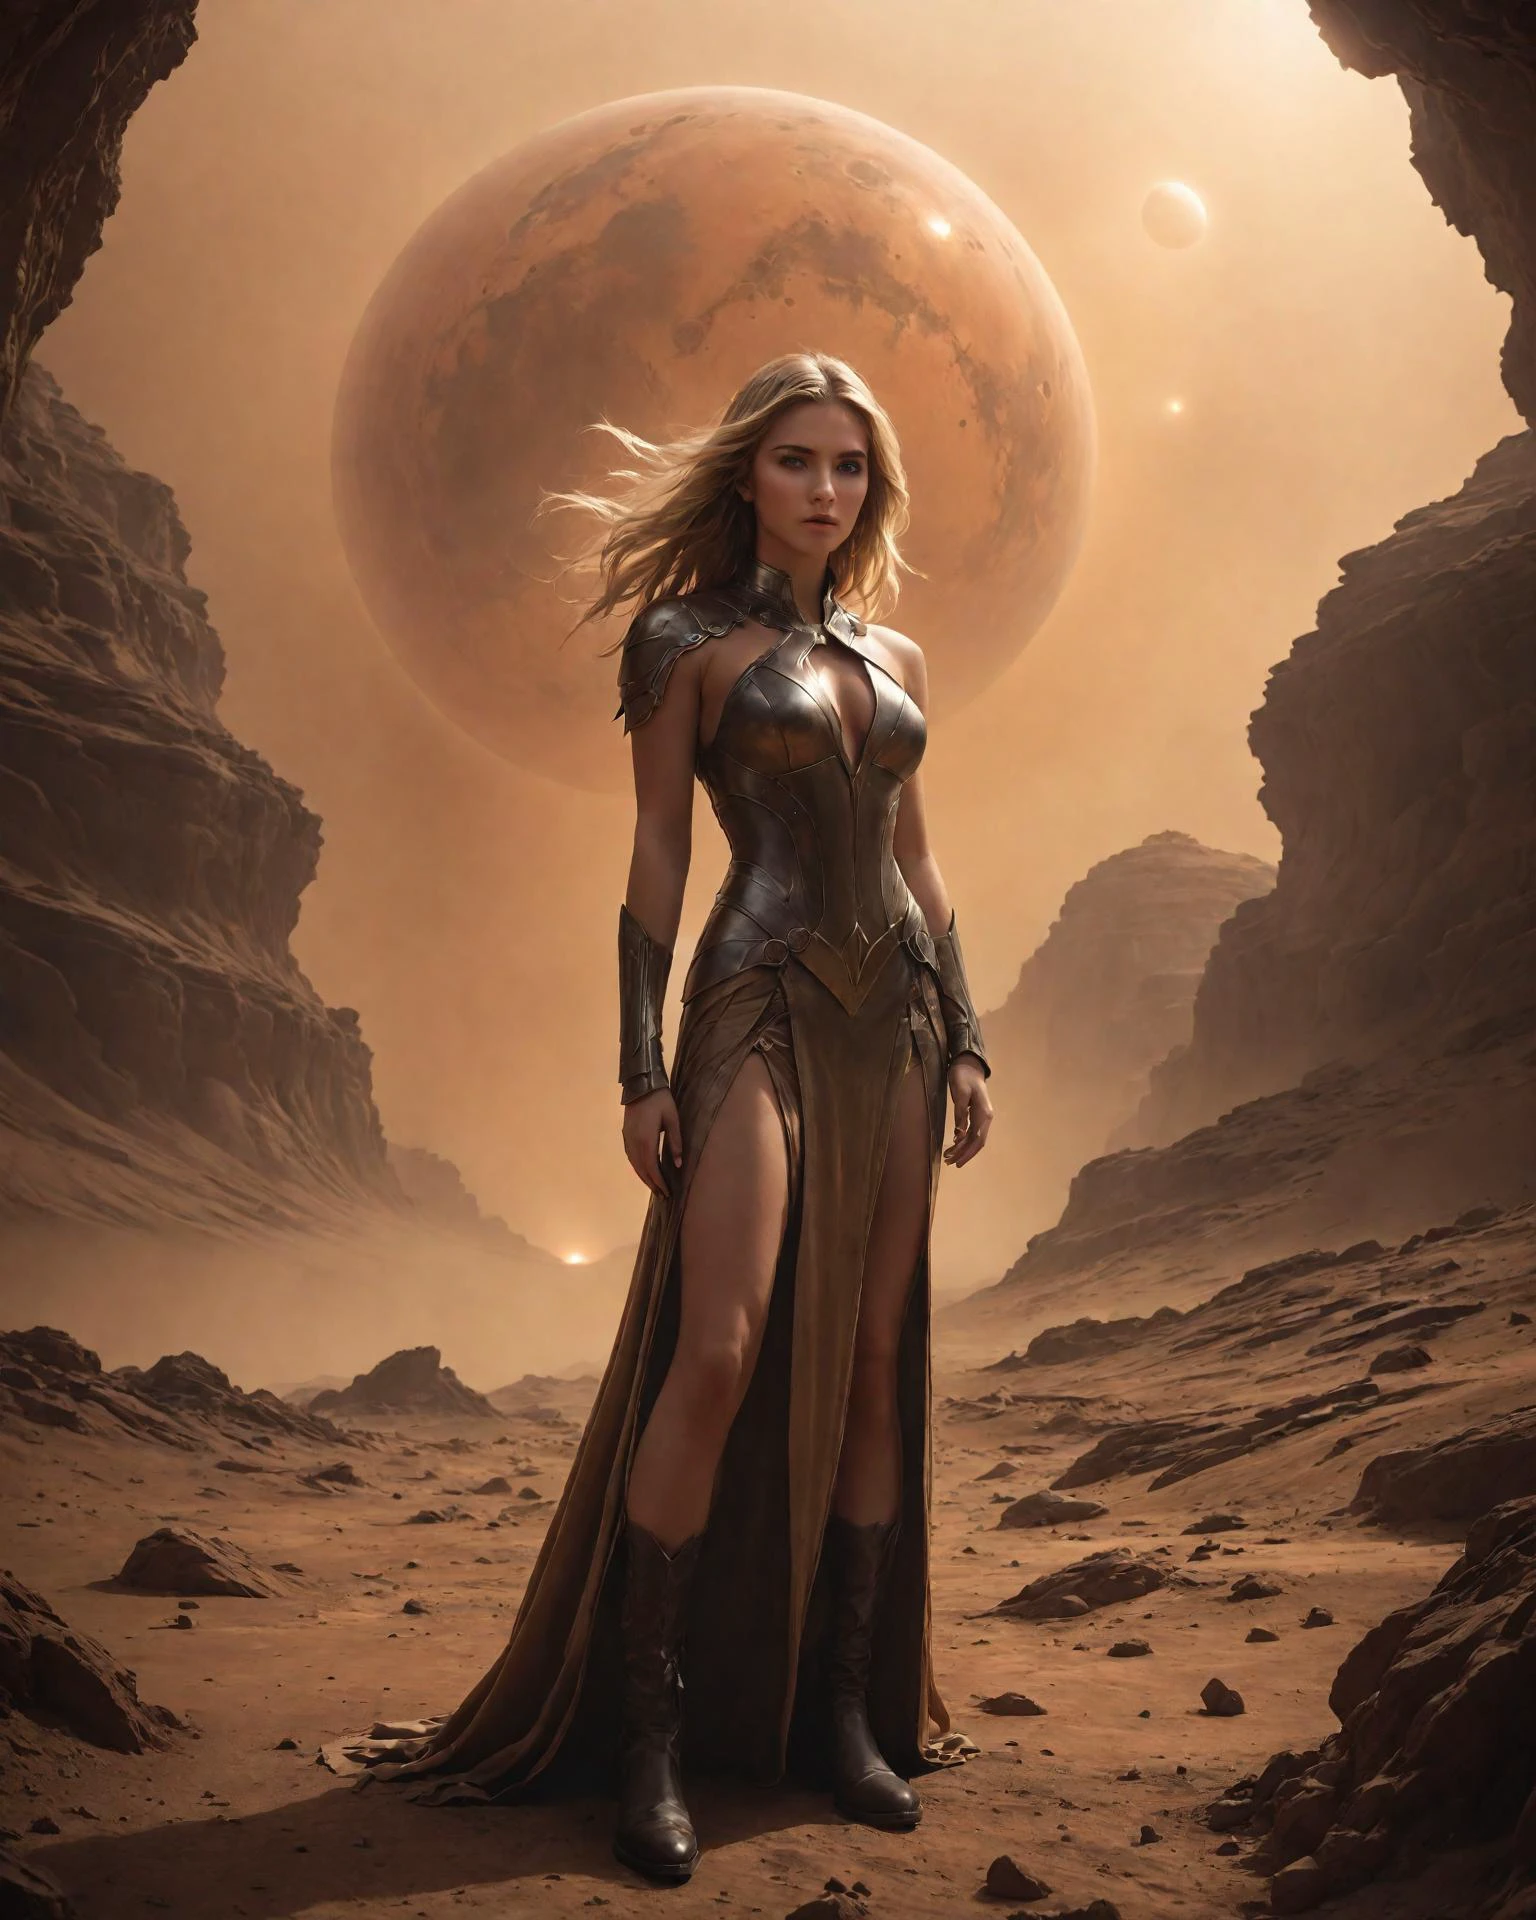 digital photo, a stunning 20 year old warrior-princess standing on the surface of mars, (detailed face), striking eyes, wearing a long [linen:armored:5] dress with bare shoulders, plunging neckline, leg slit, leather combat boots, slender athletic build, she is a small young woman but strong despite her size, fierce expression, lips pressed firmly together, long gorgeous blonde hair, a glowing orange fog hangs over the empty battlefield, on the red planet distant mountains and dust devils terrorize the jagged hostile landscape, dust storm, red lightning, fierce winds, scifi fantasy setting, cinematic lighting, 